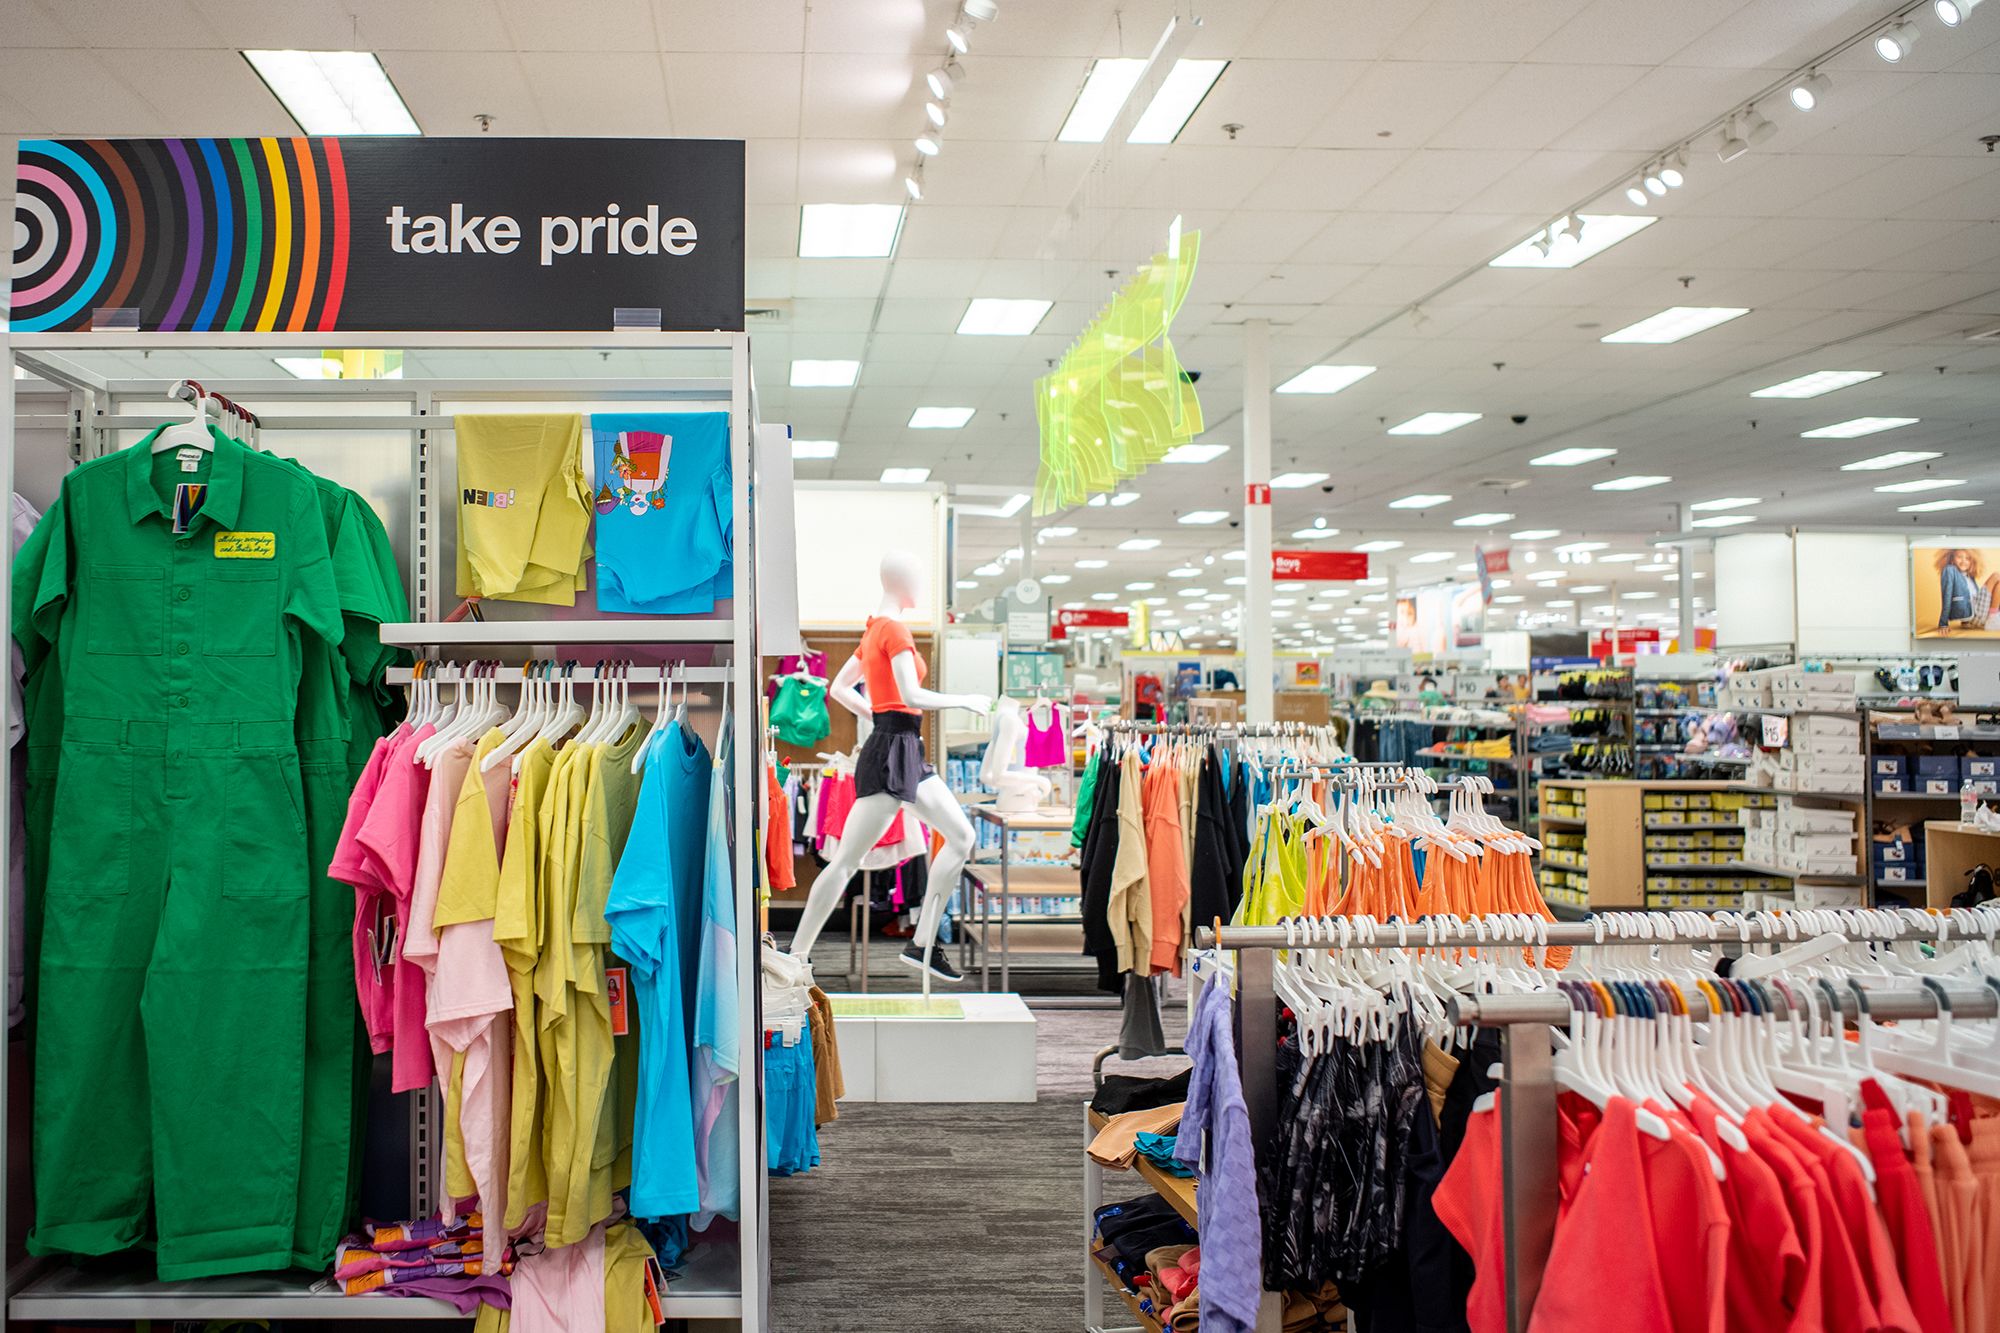 Target becomes latest company to suffer backlash for LGBTQ+